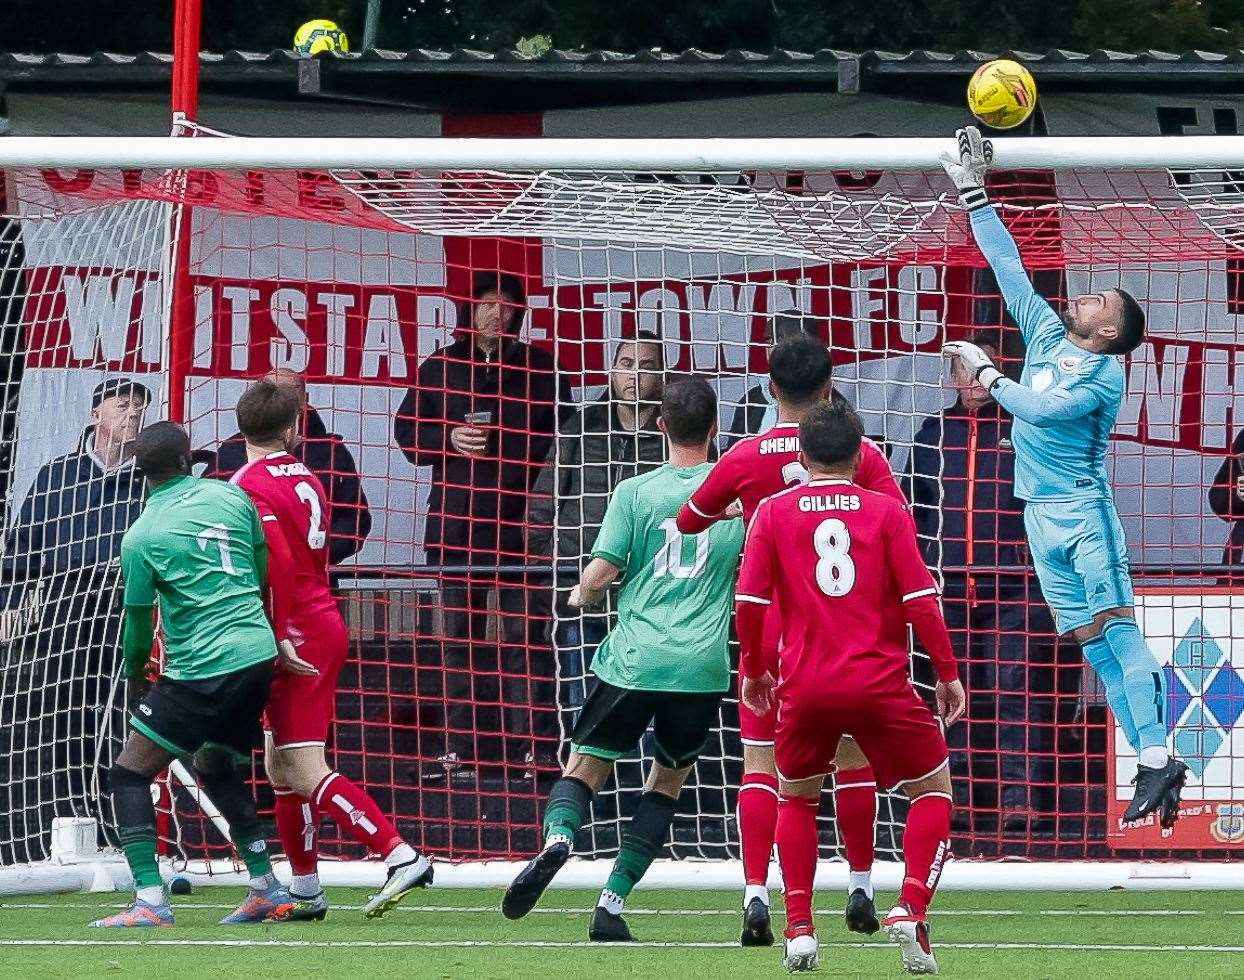 Goalkeeper Dan Eason gets up and attempts to guide the ball over the crossbar. Picture: Les Biggs